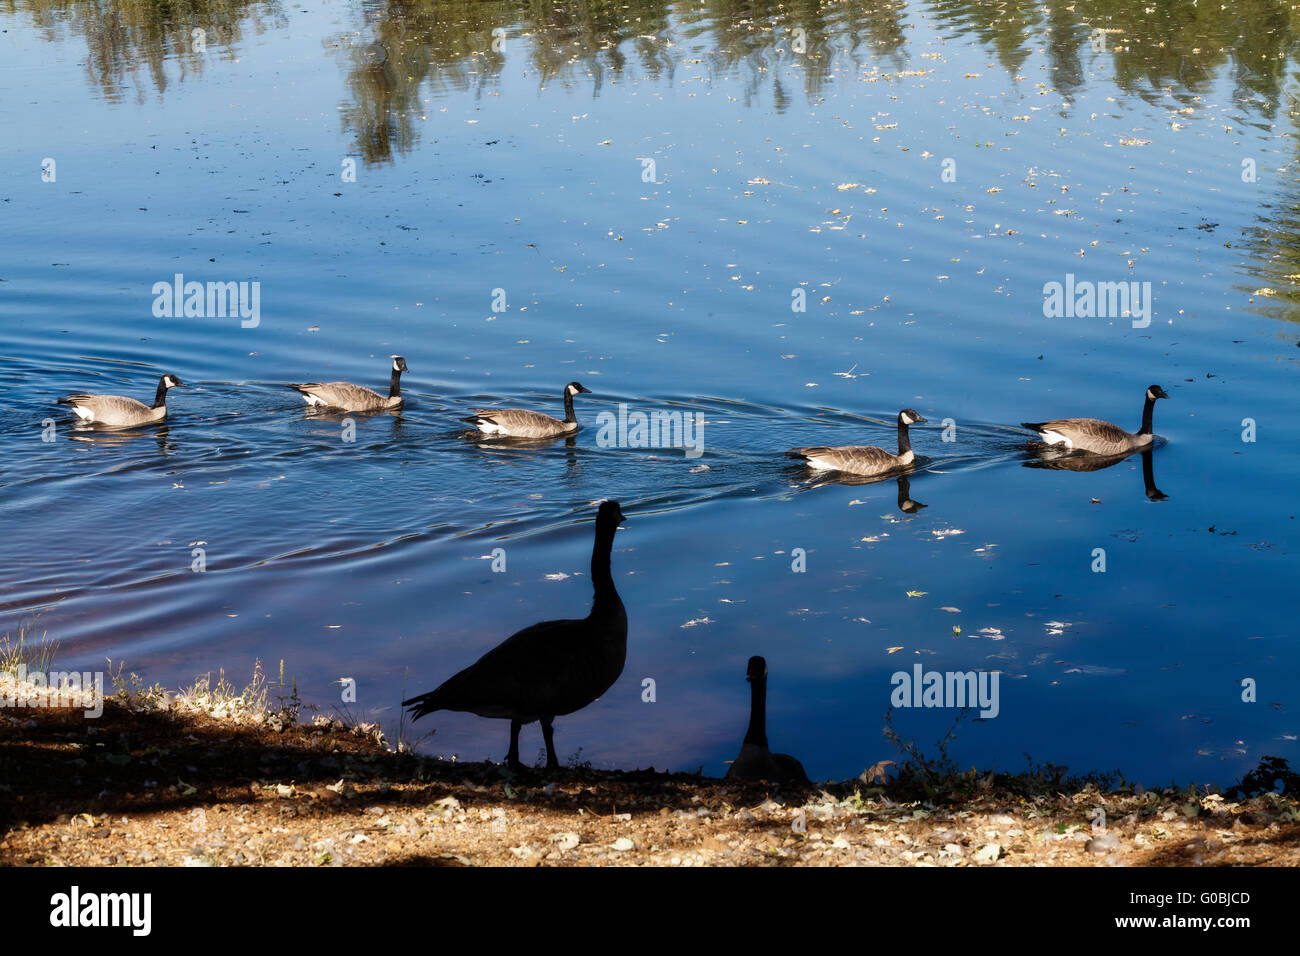 Canadian Geese Swimming And Standing On Shore Stock Photo